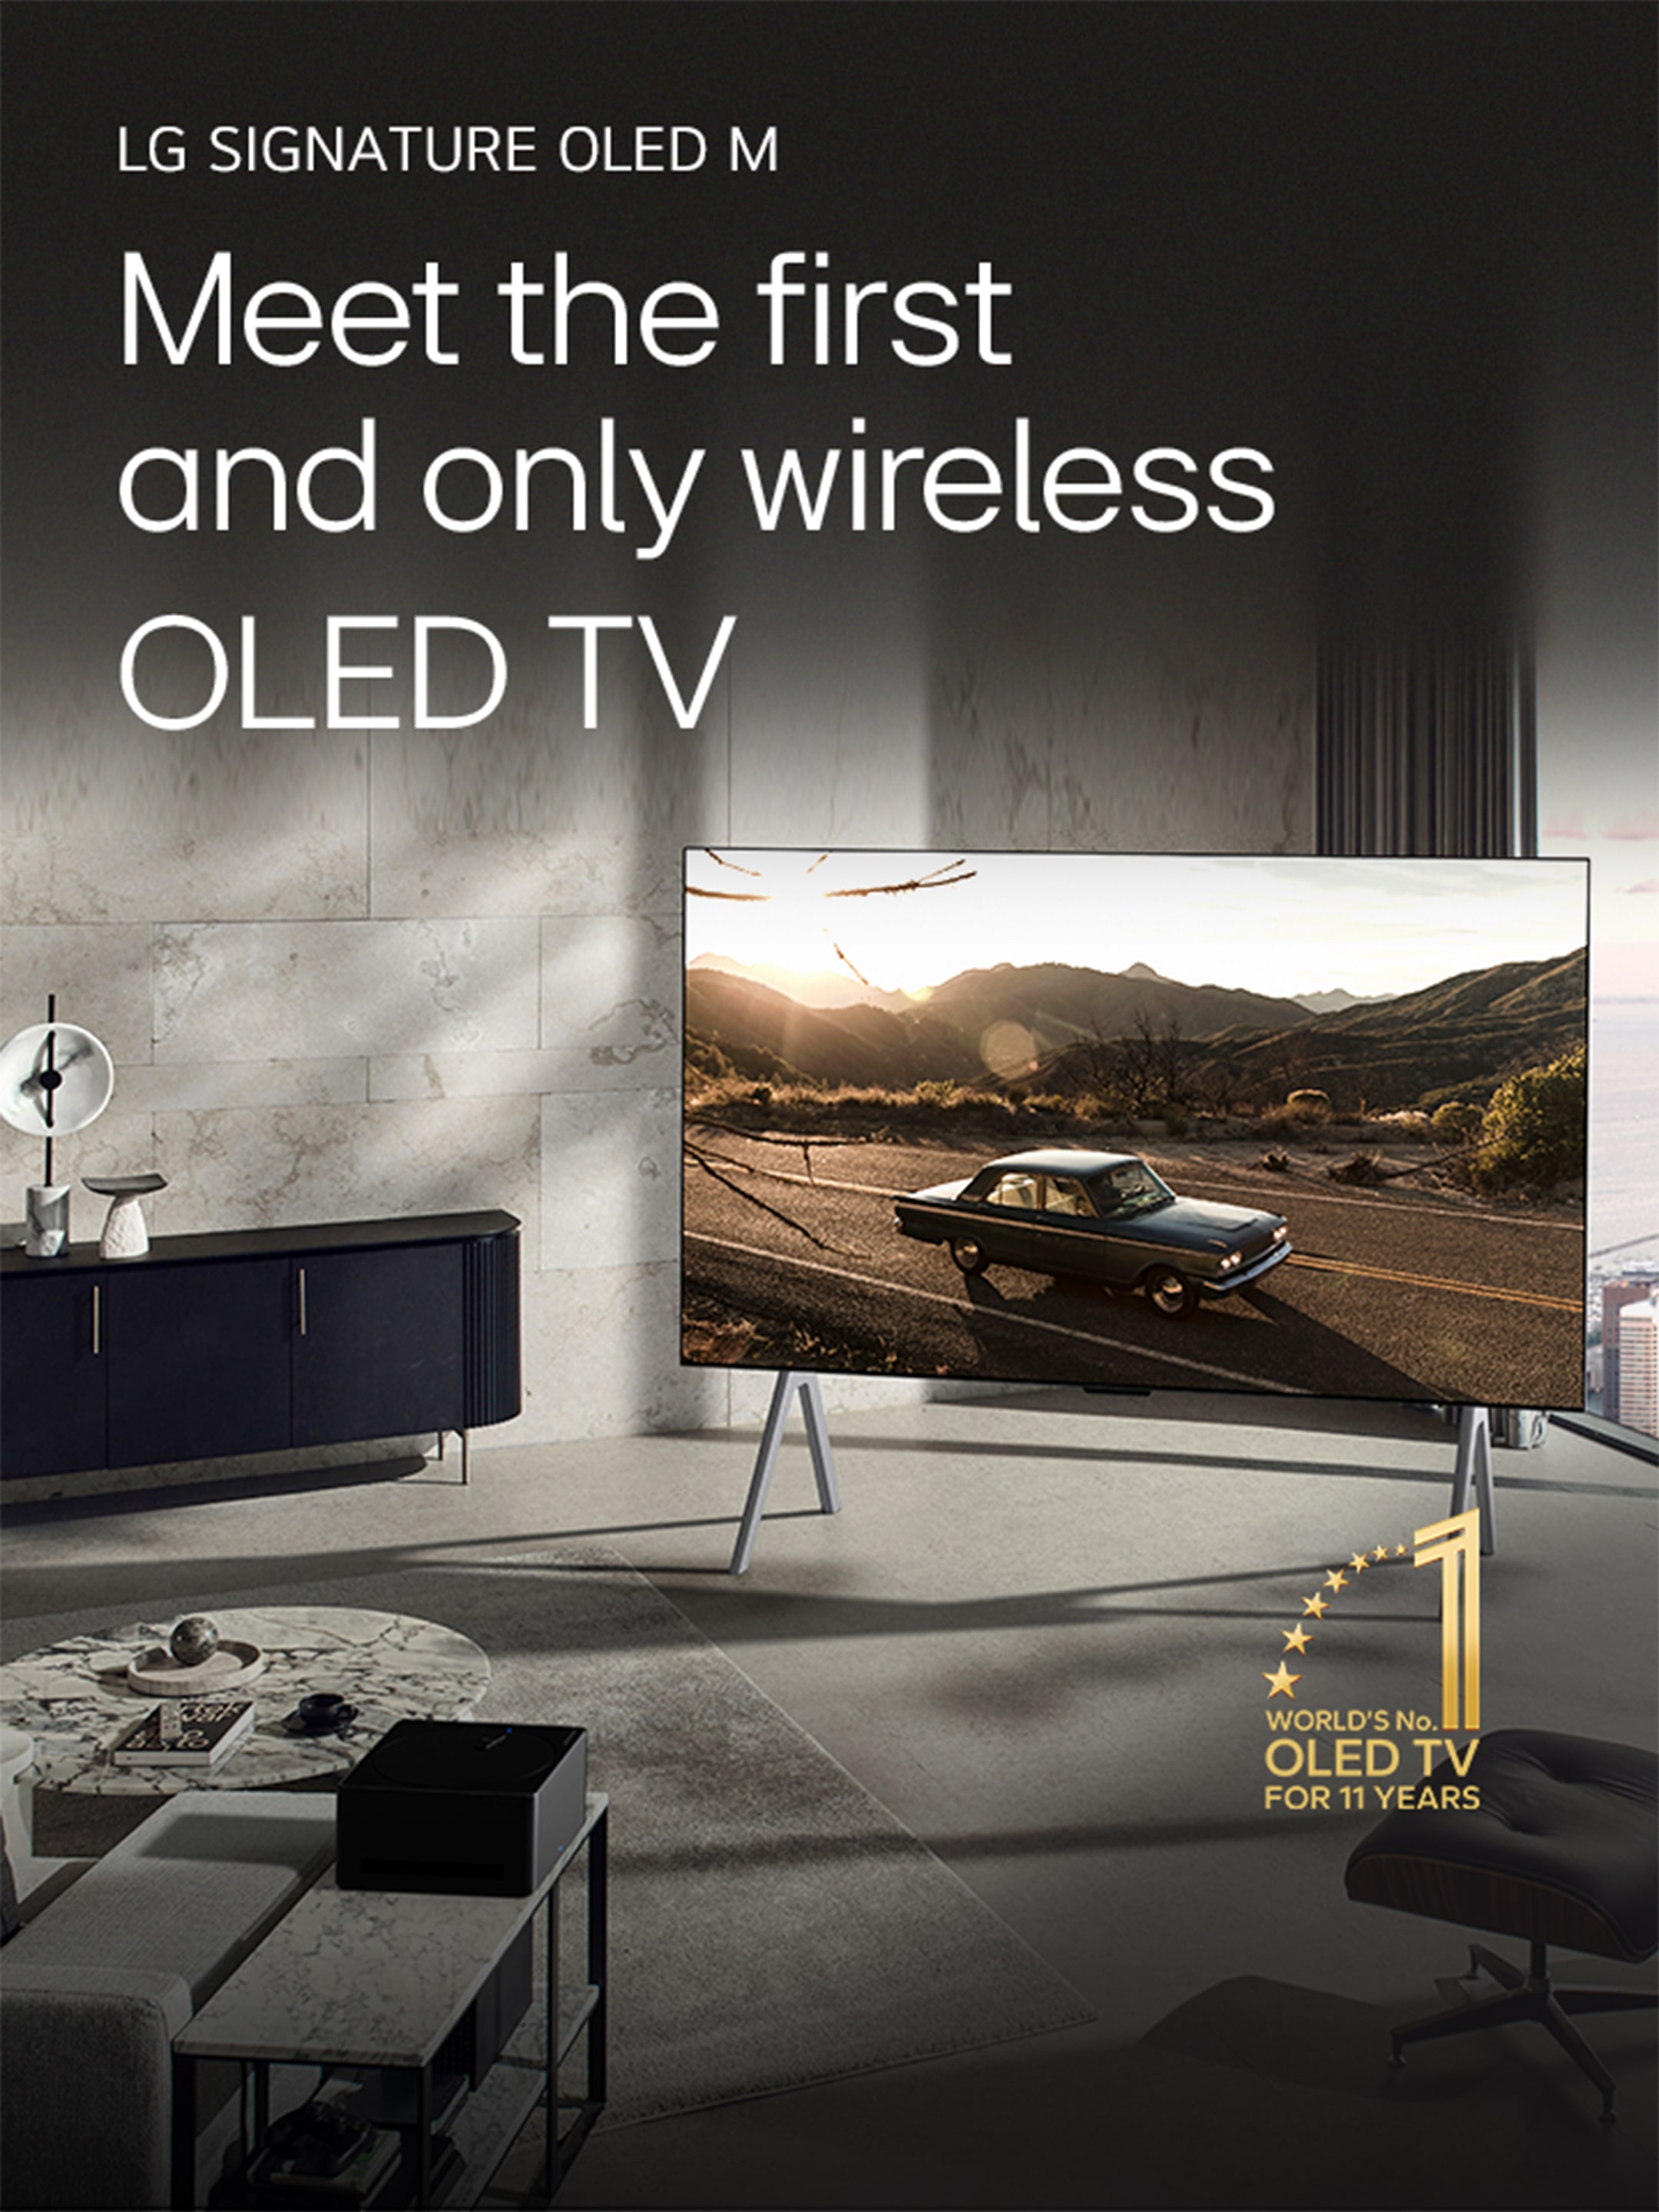 First and only wierless OLED TV